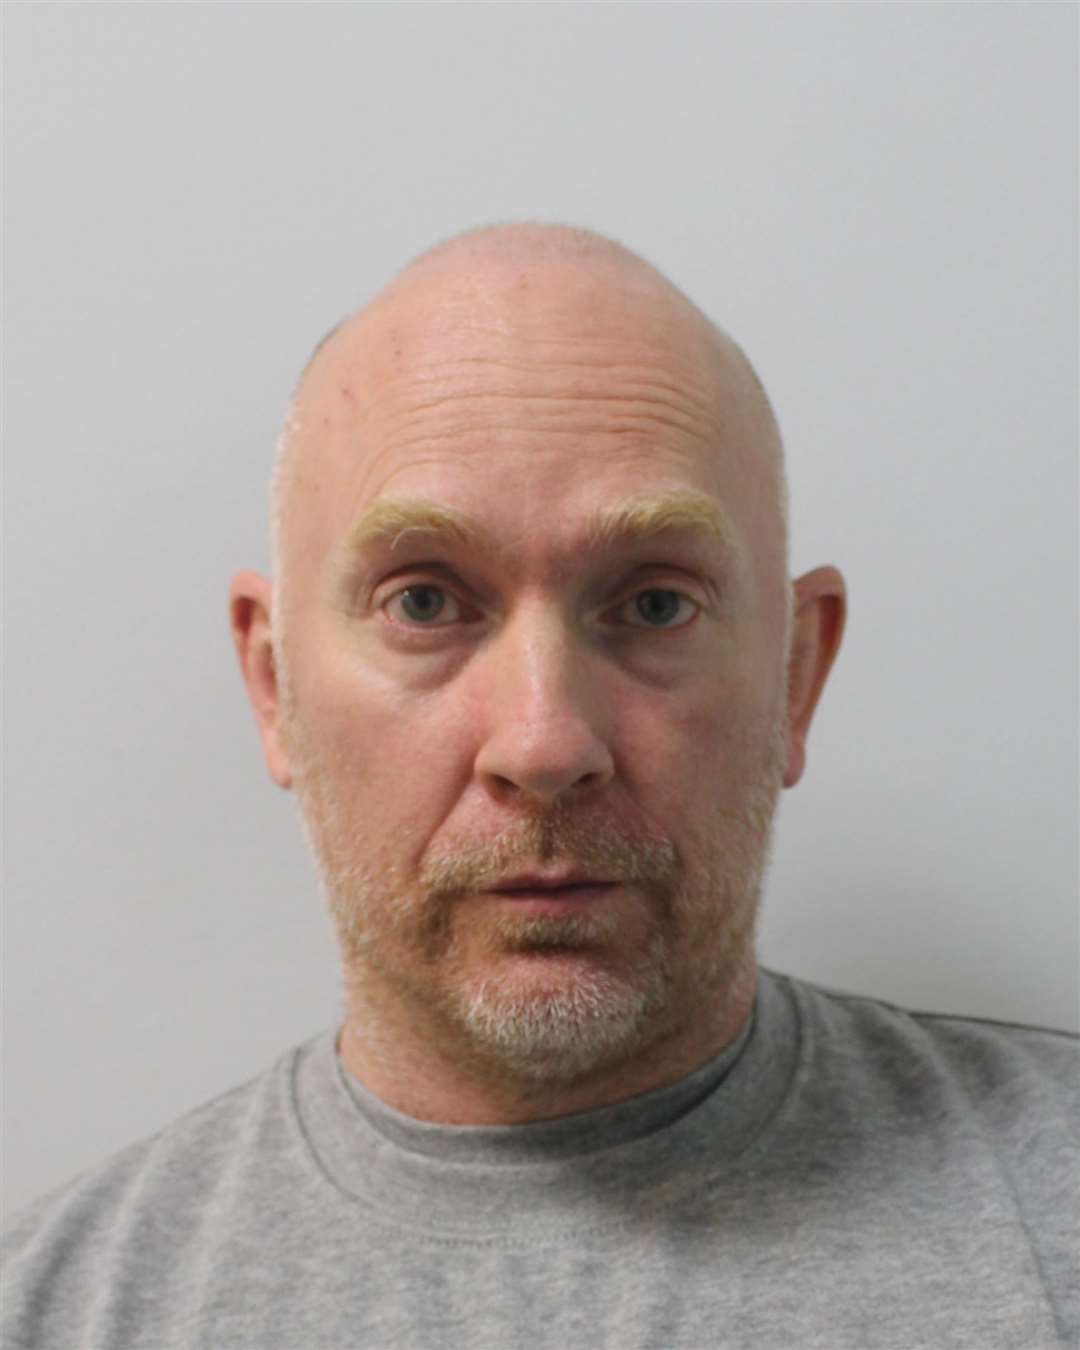 Wayne Couzens pleaded guilty to murder at the Old Bailey Photo: Met Police